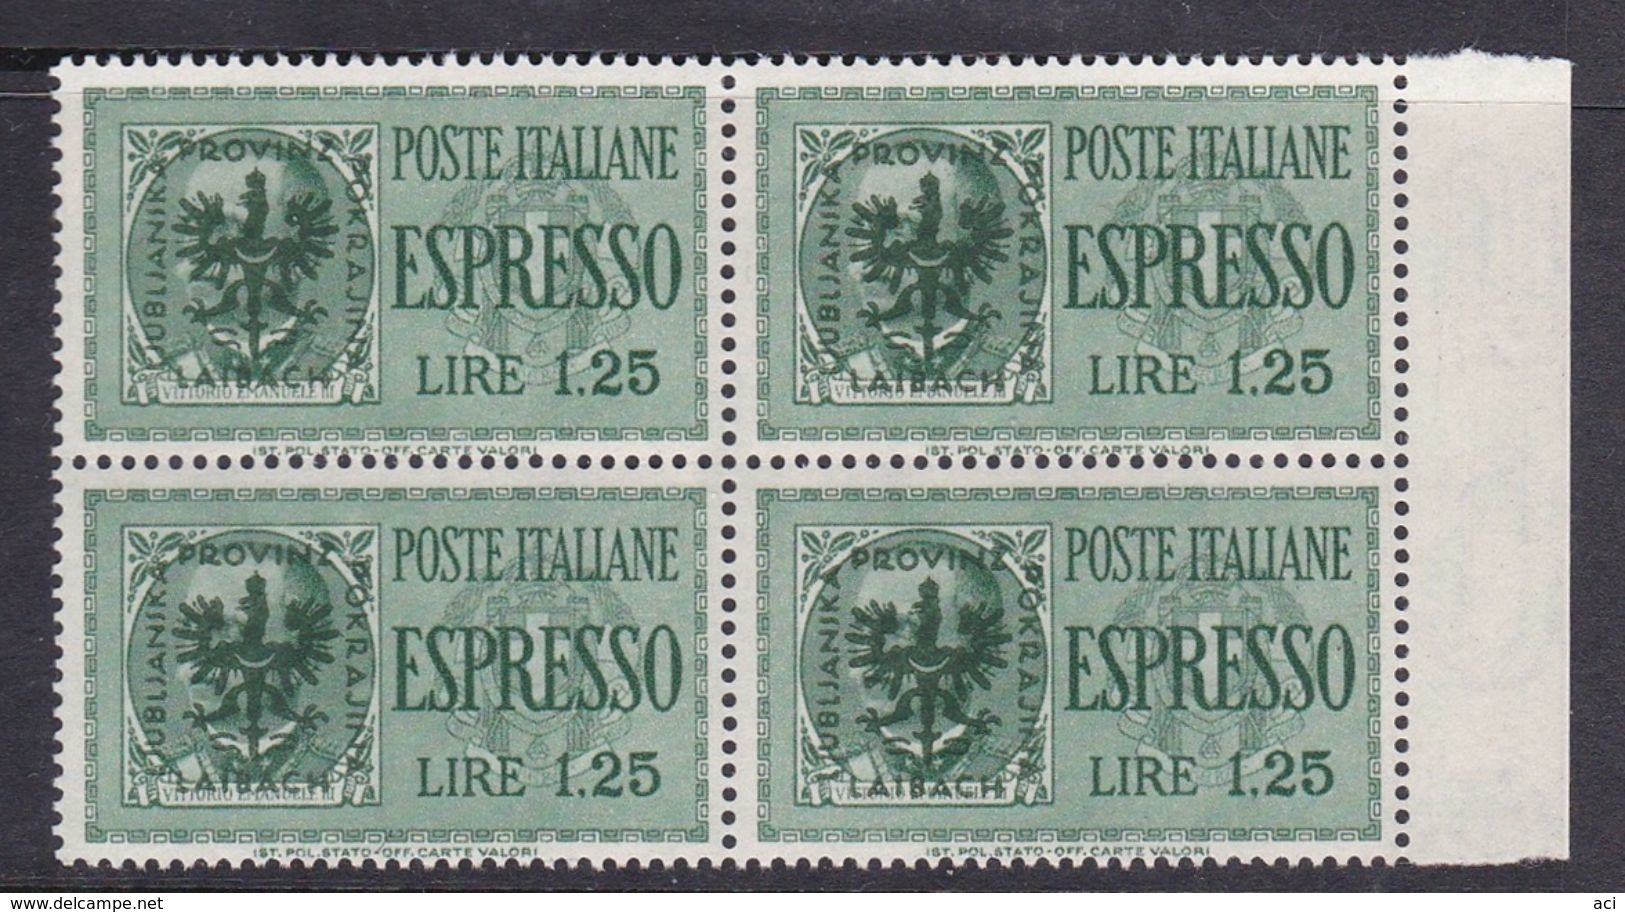 Italy-WW II Occupation-German Occupation Of Lubiana, E 4 1944 Special Delivery Stamp, Lire 1,25 Green Block 4 MNH - Deutsche Bes.: Lubiana